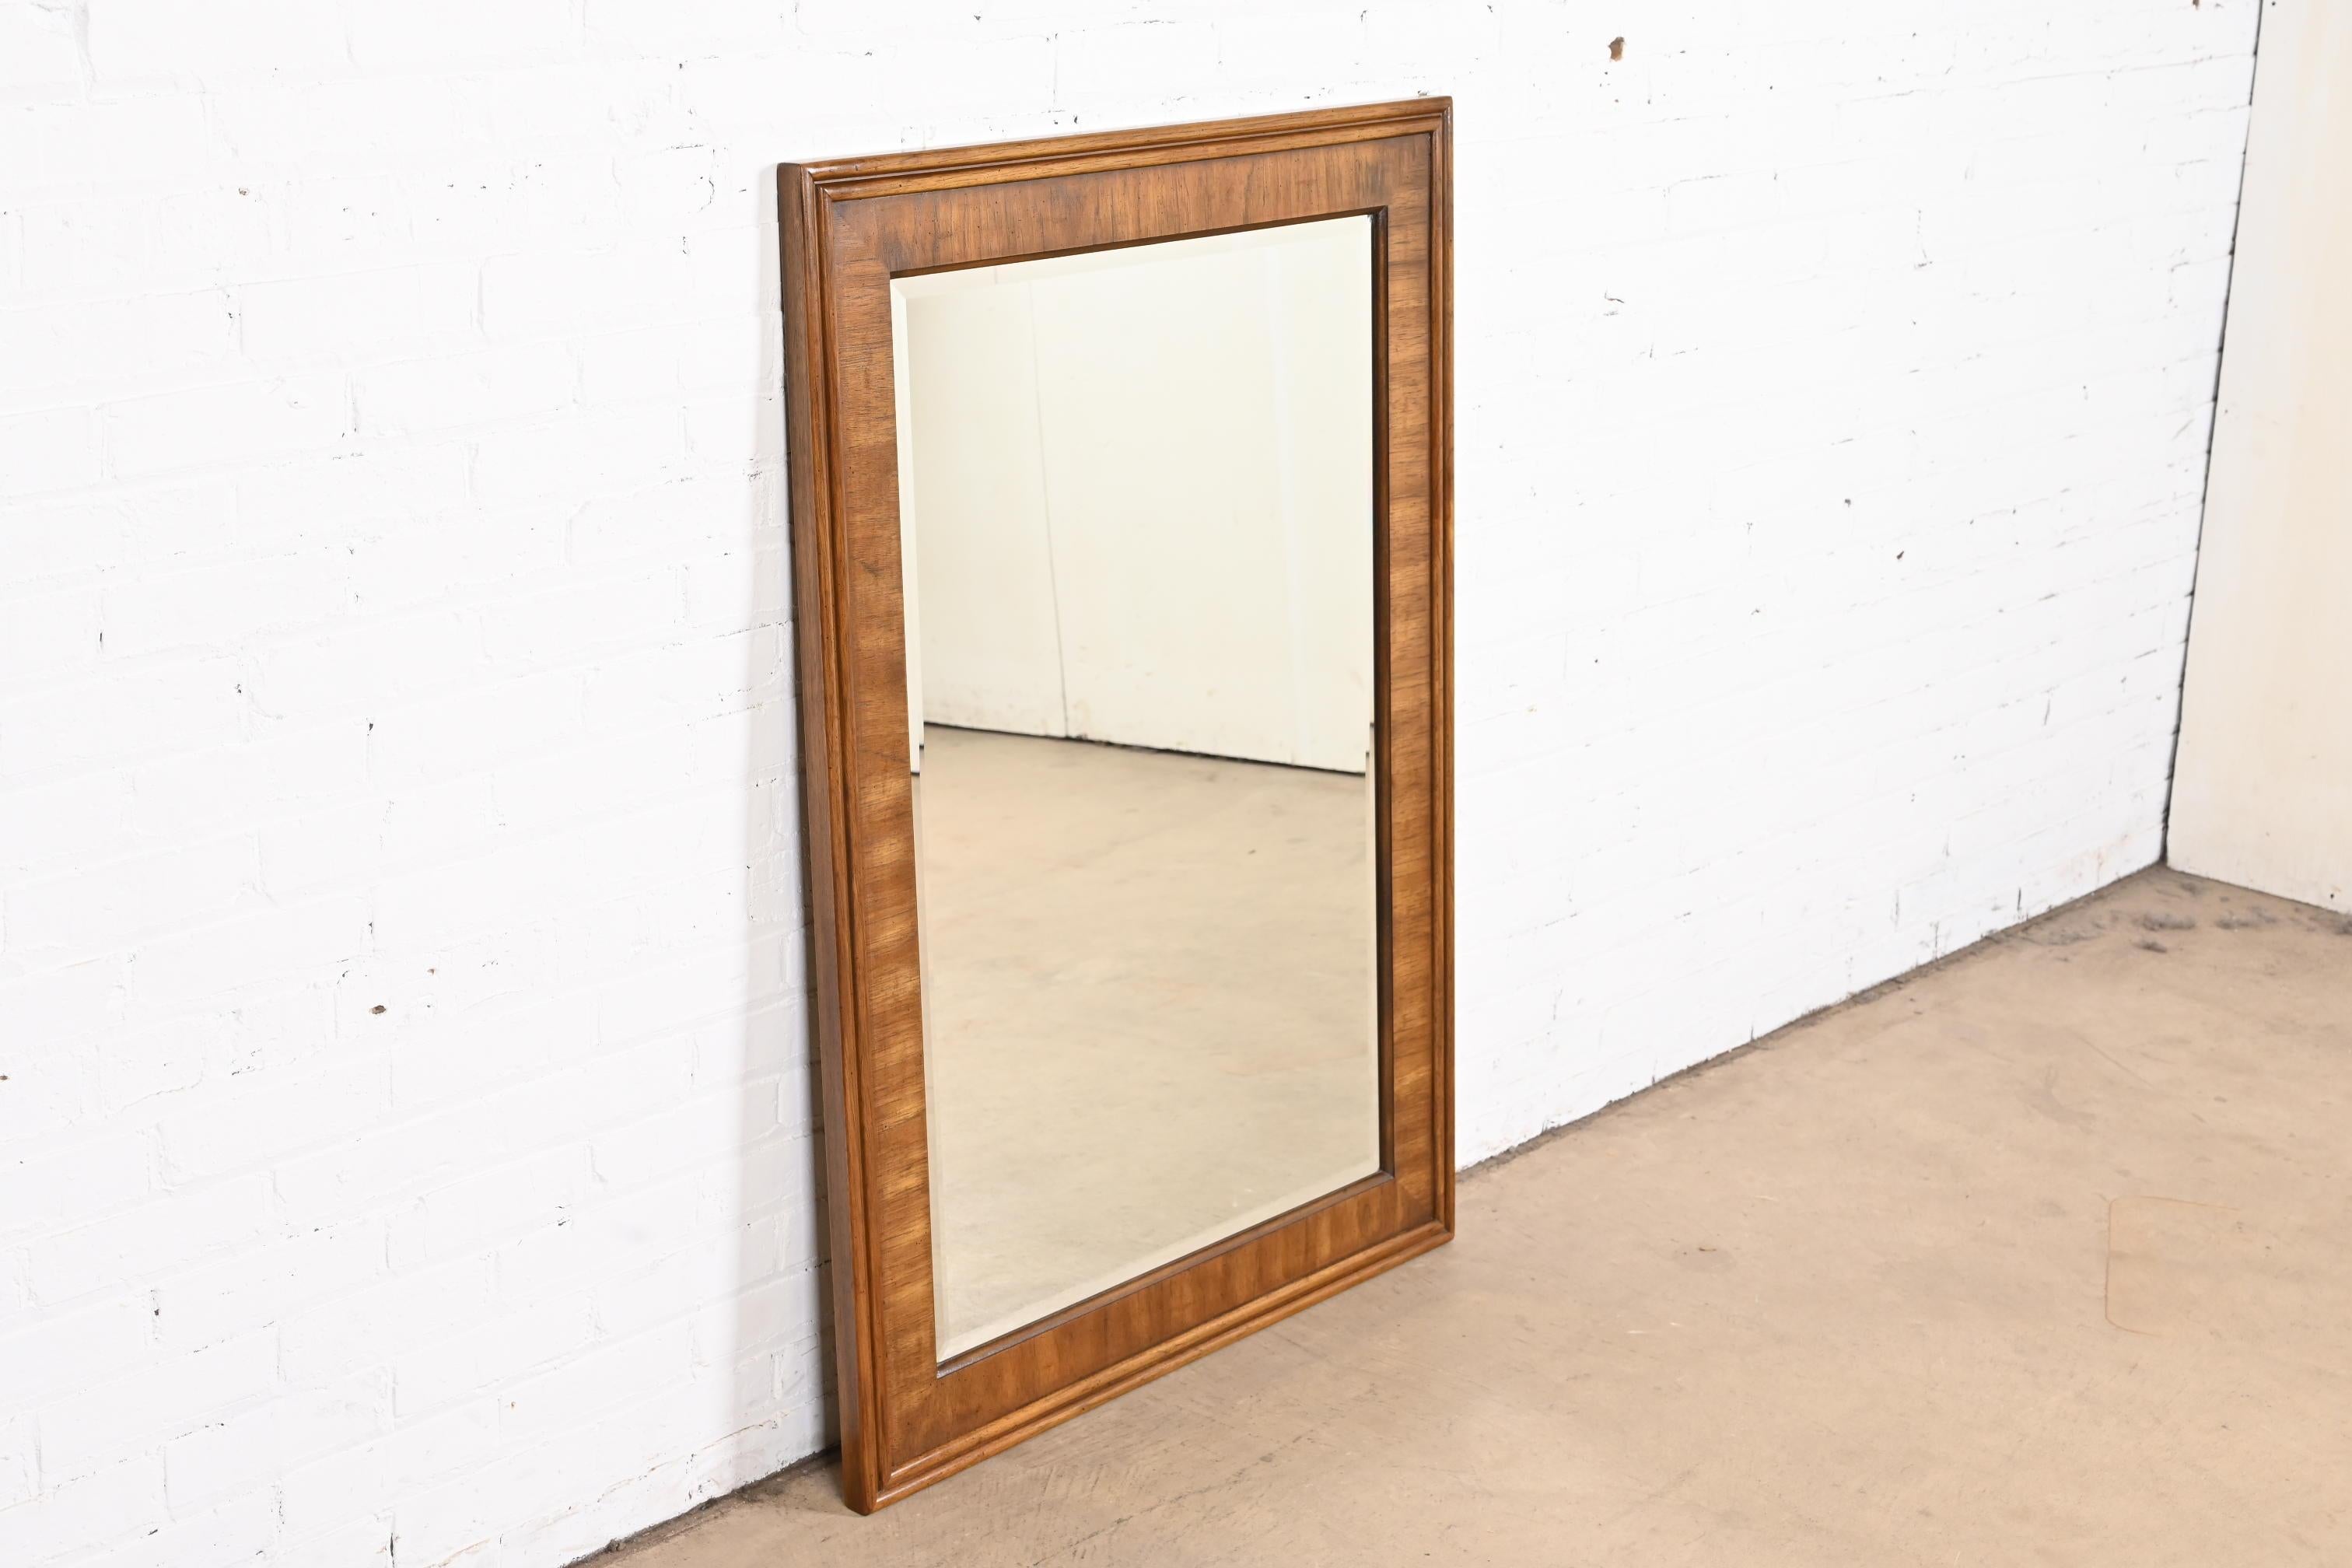 A gorgeous Modern walnut framed large beveled glass mirror.

By Drexel Heritage.

USA, 1980s

Measures: 33.63